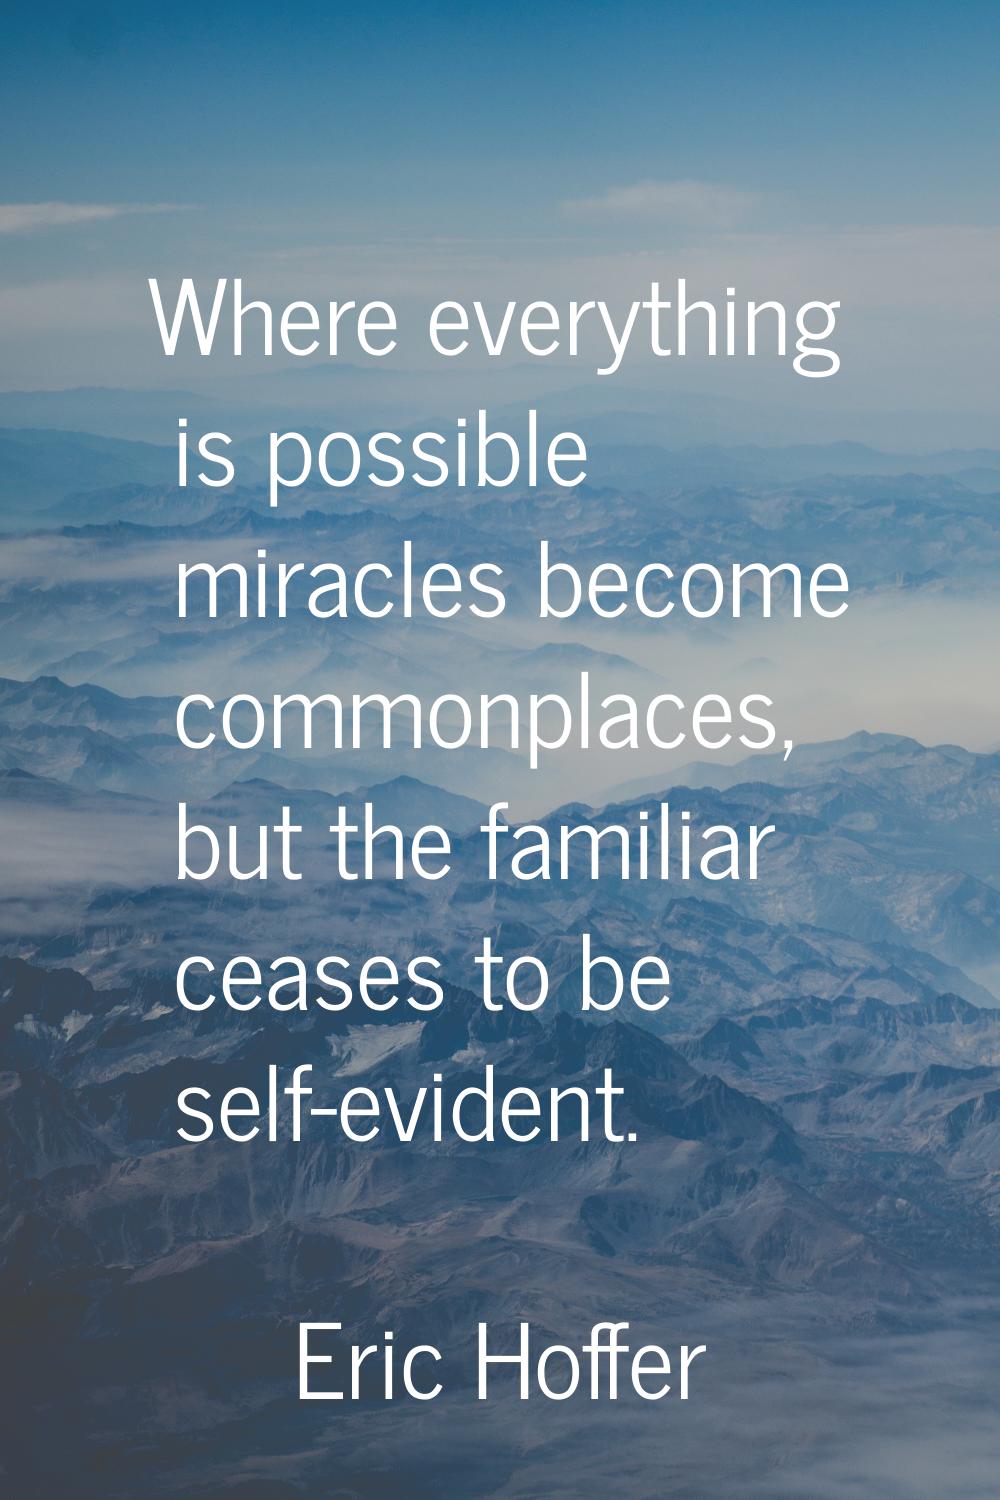 Where everything is possible miracles become commonplaces, but the familiar ceases to be self-evide